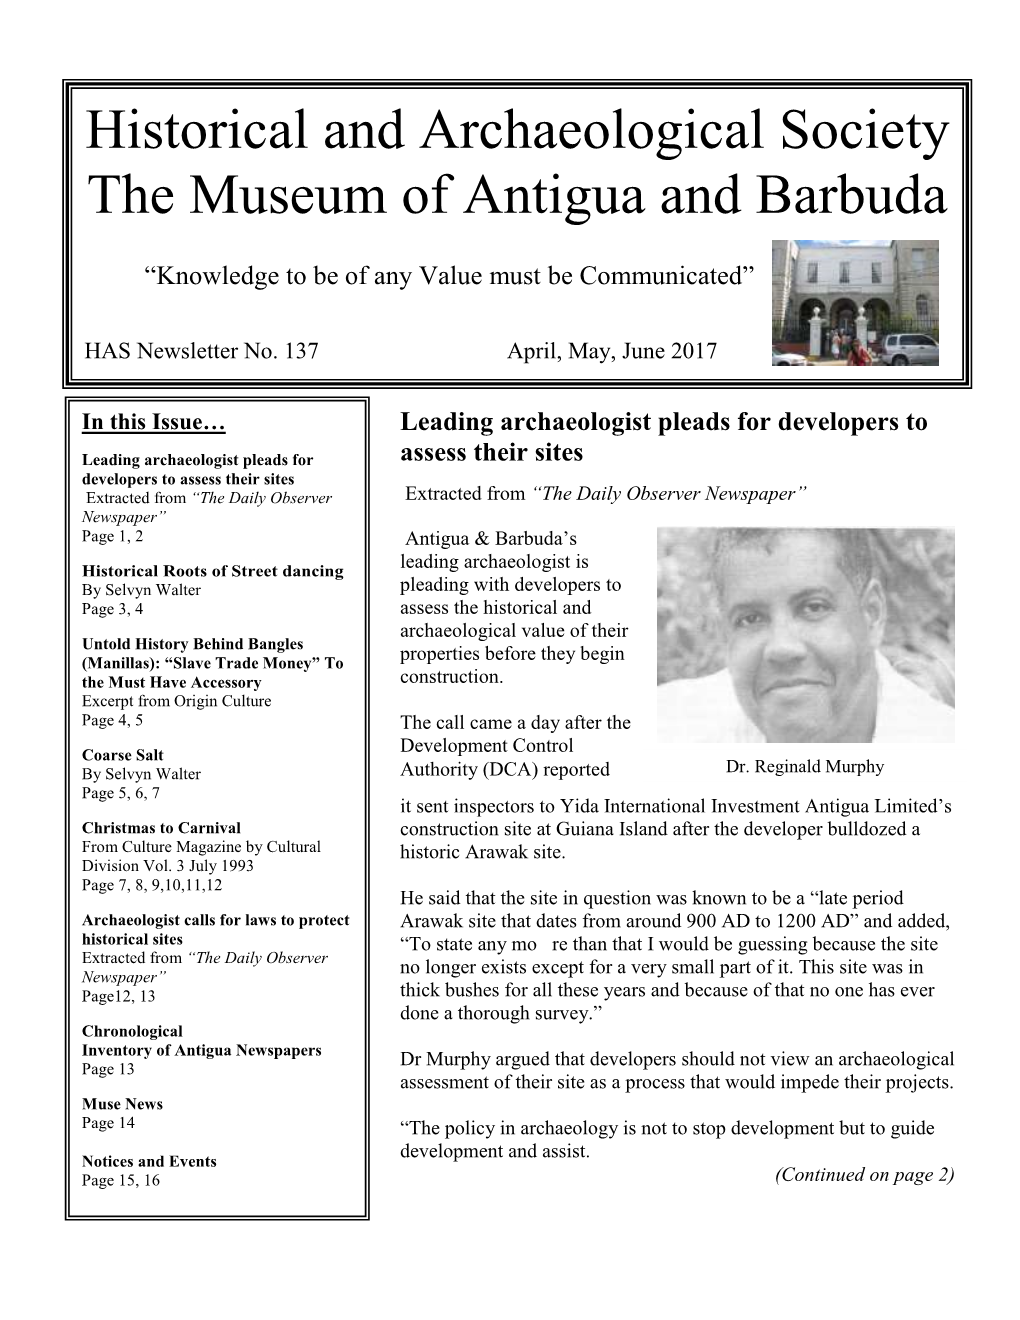 Historical and Archaeological Society the Museum of Antigua and Barbuda